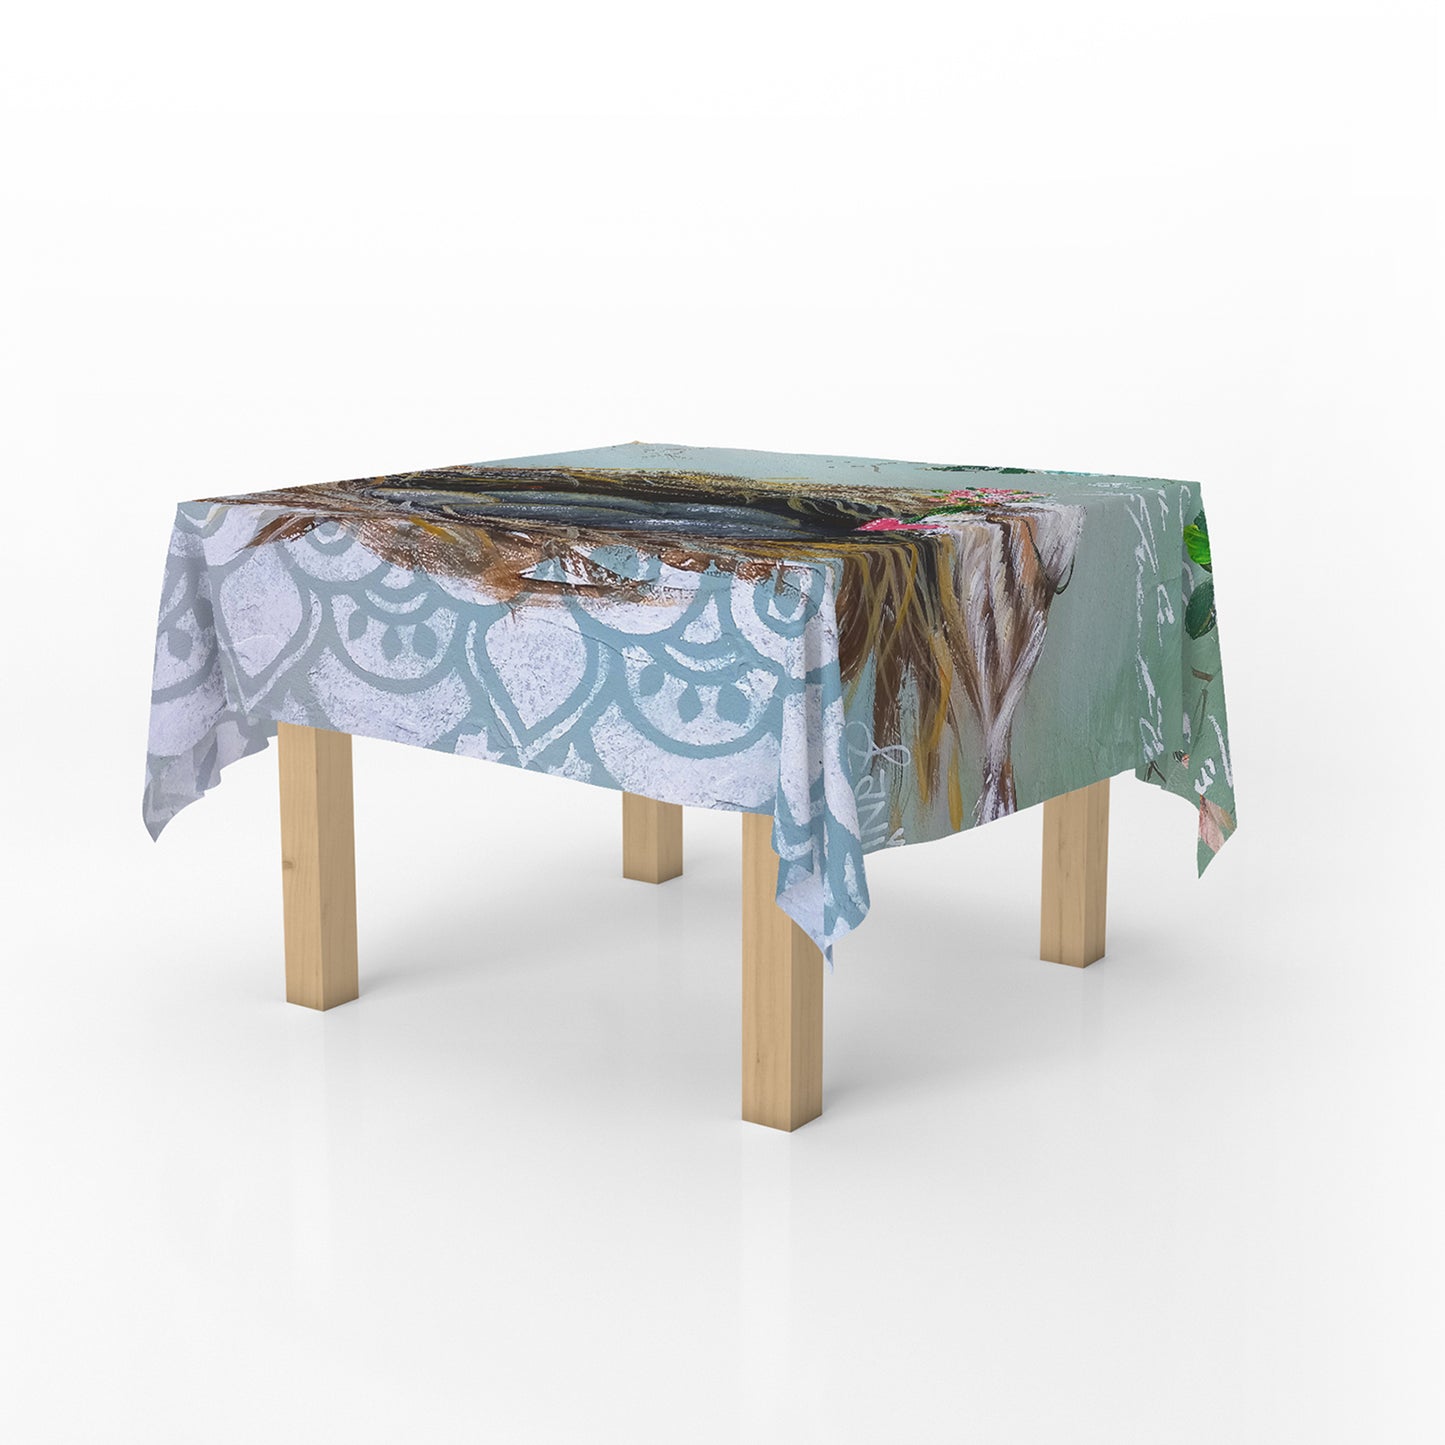 Nesting Birds Square Tablecloth By Lanie’s Art